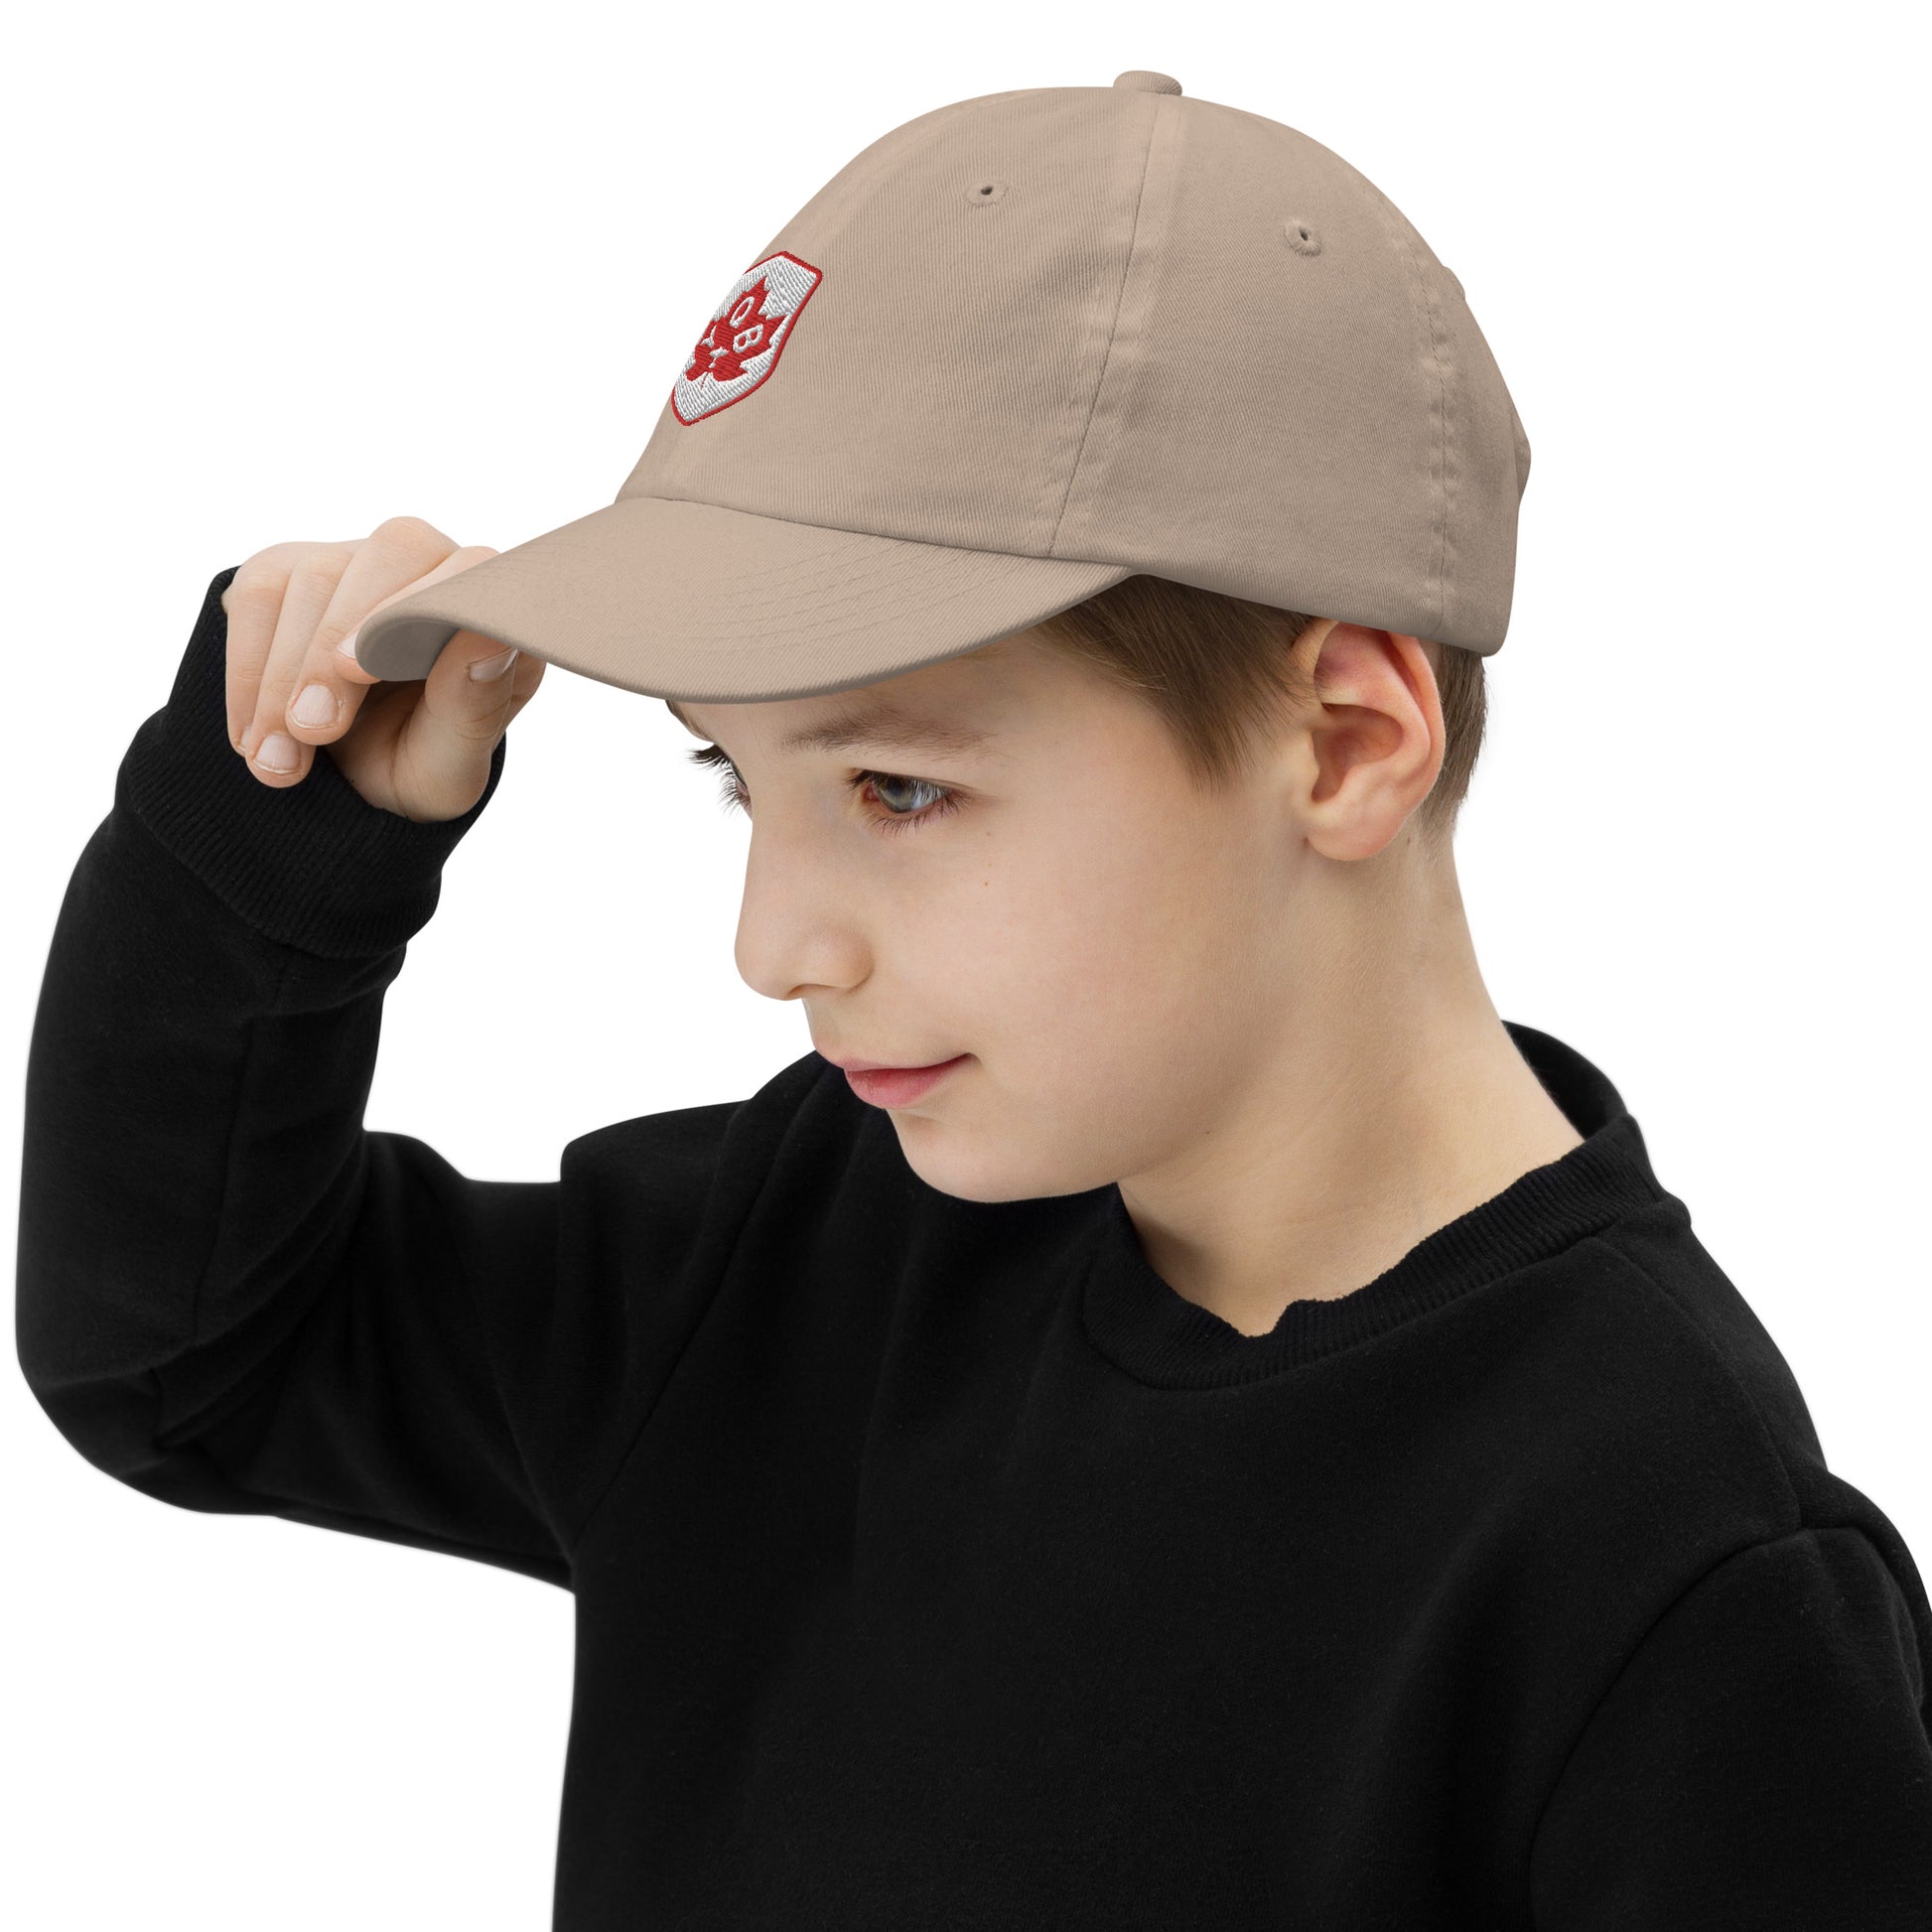 Maple Leaf Kid's Cap - Red/White • YQB Quebec City • YHM Designs - Image 10